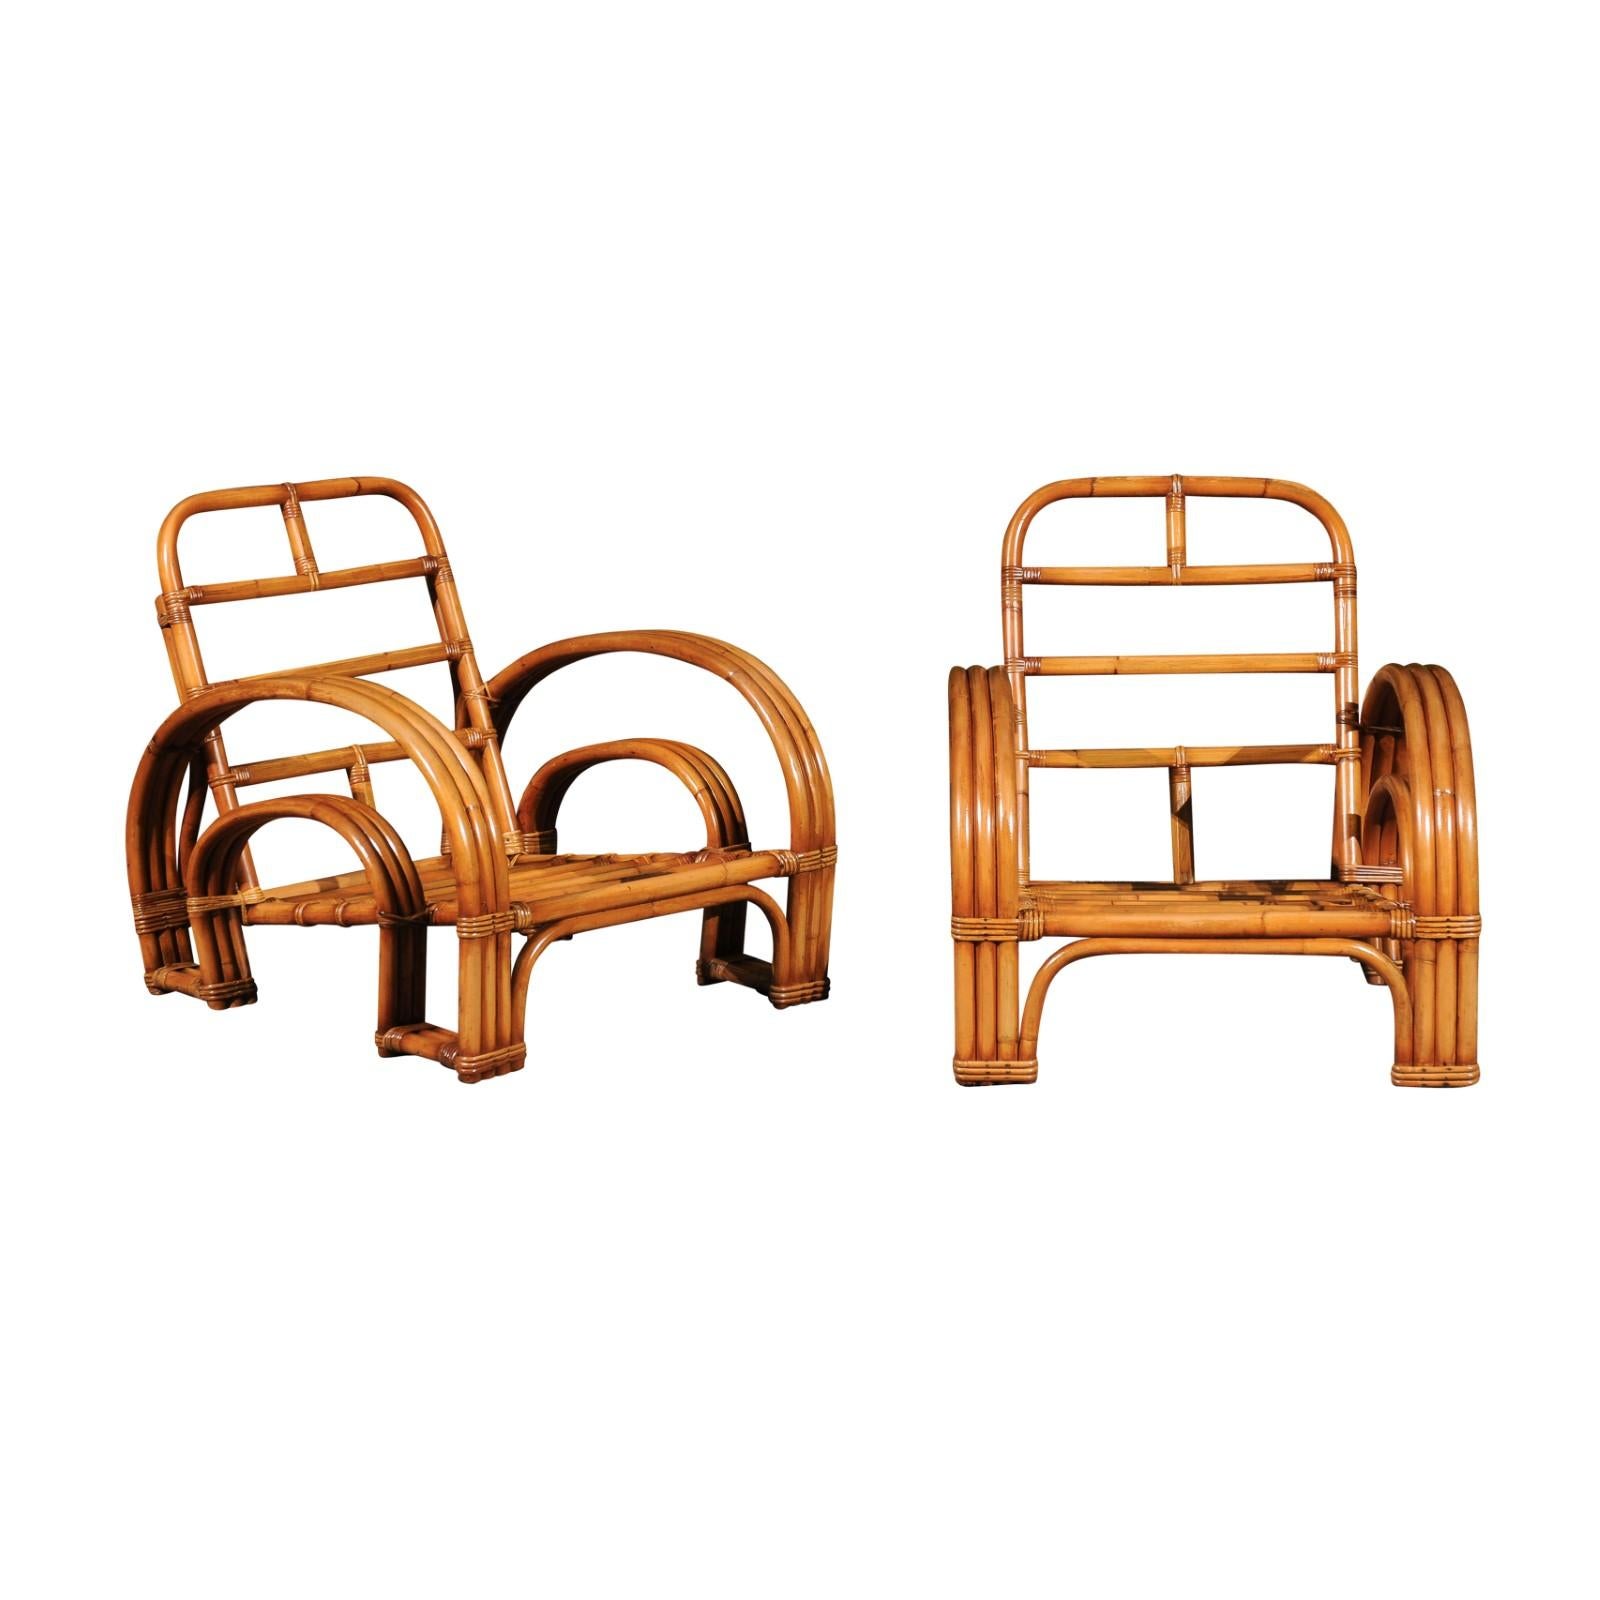 Unforgettable Pair of Art Deco Rattan and Cane Double Horseshoe Loungers  For Sale 14